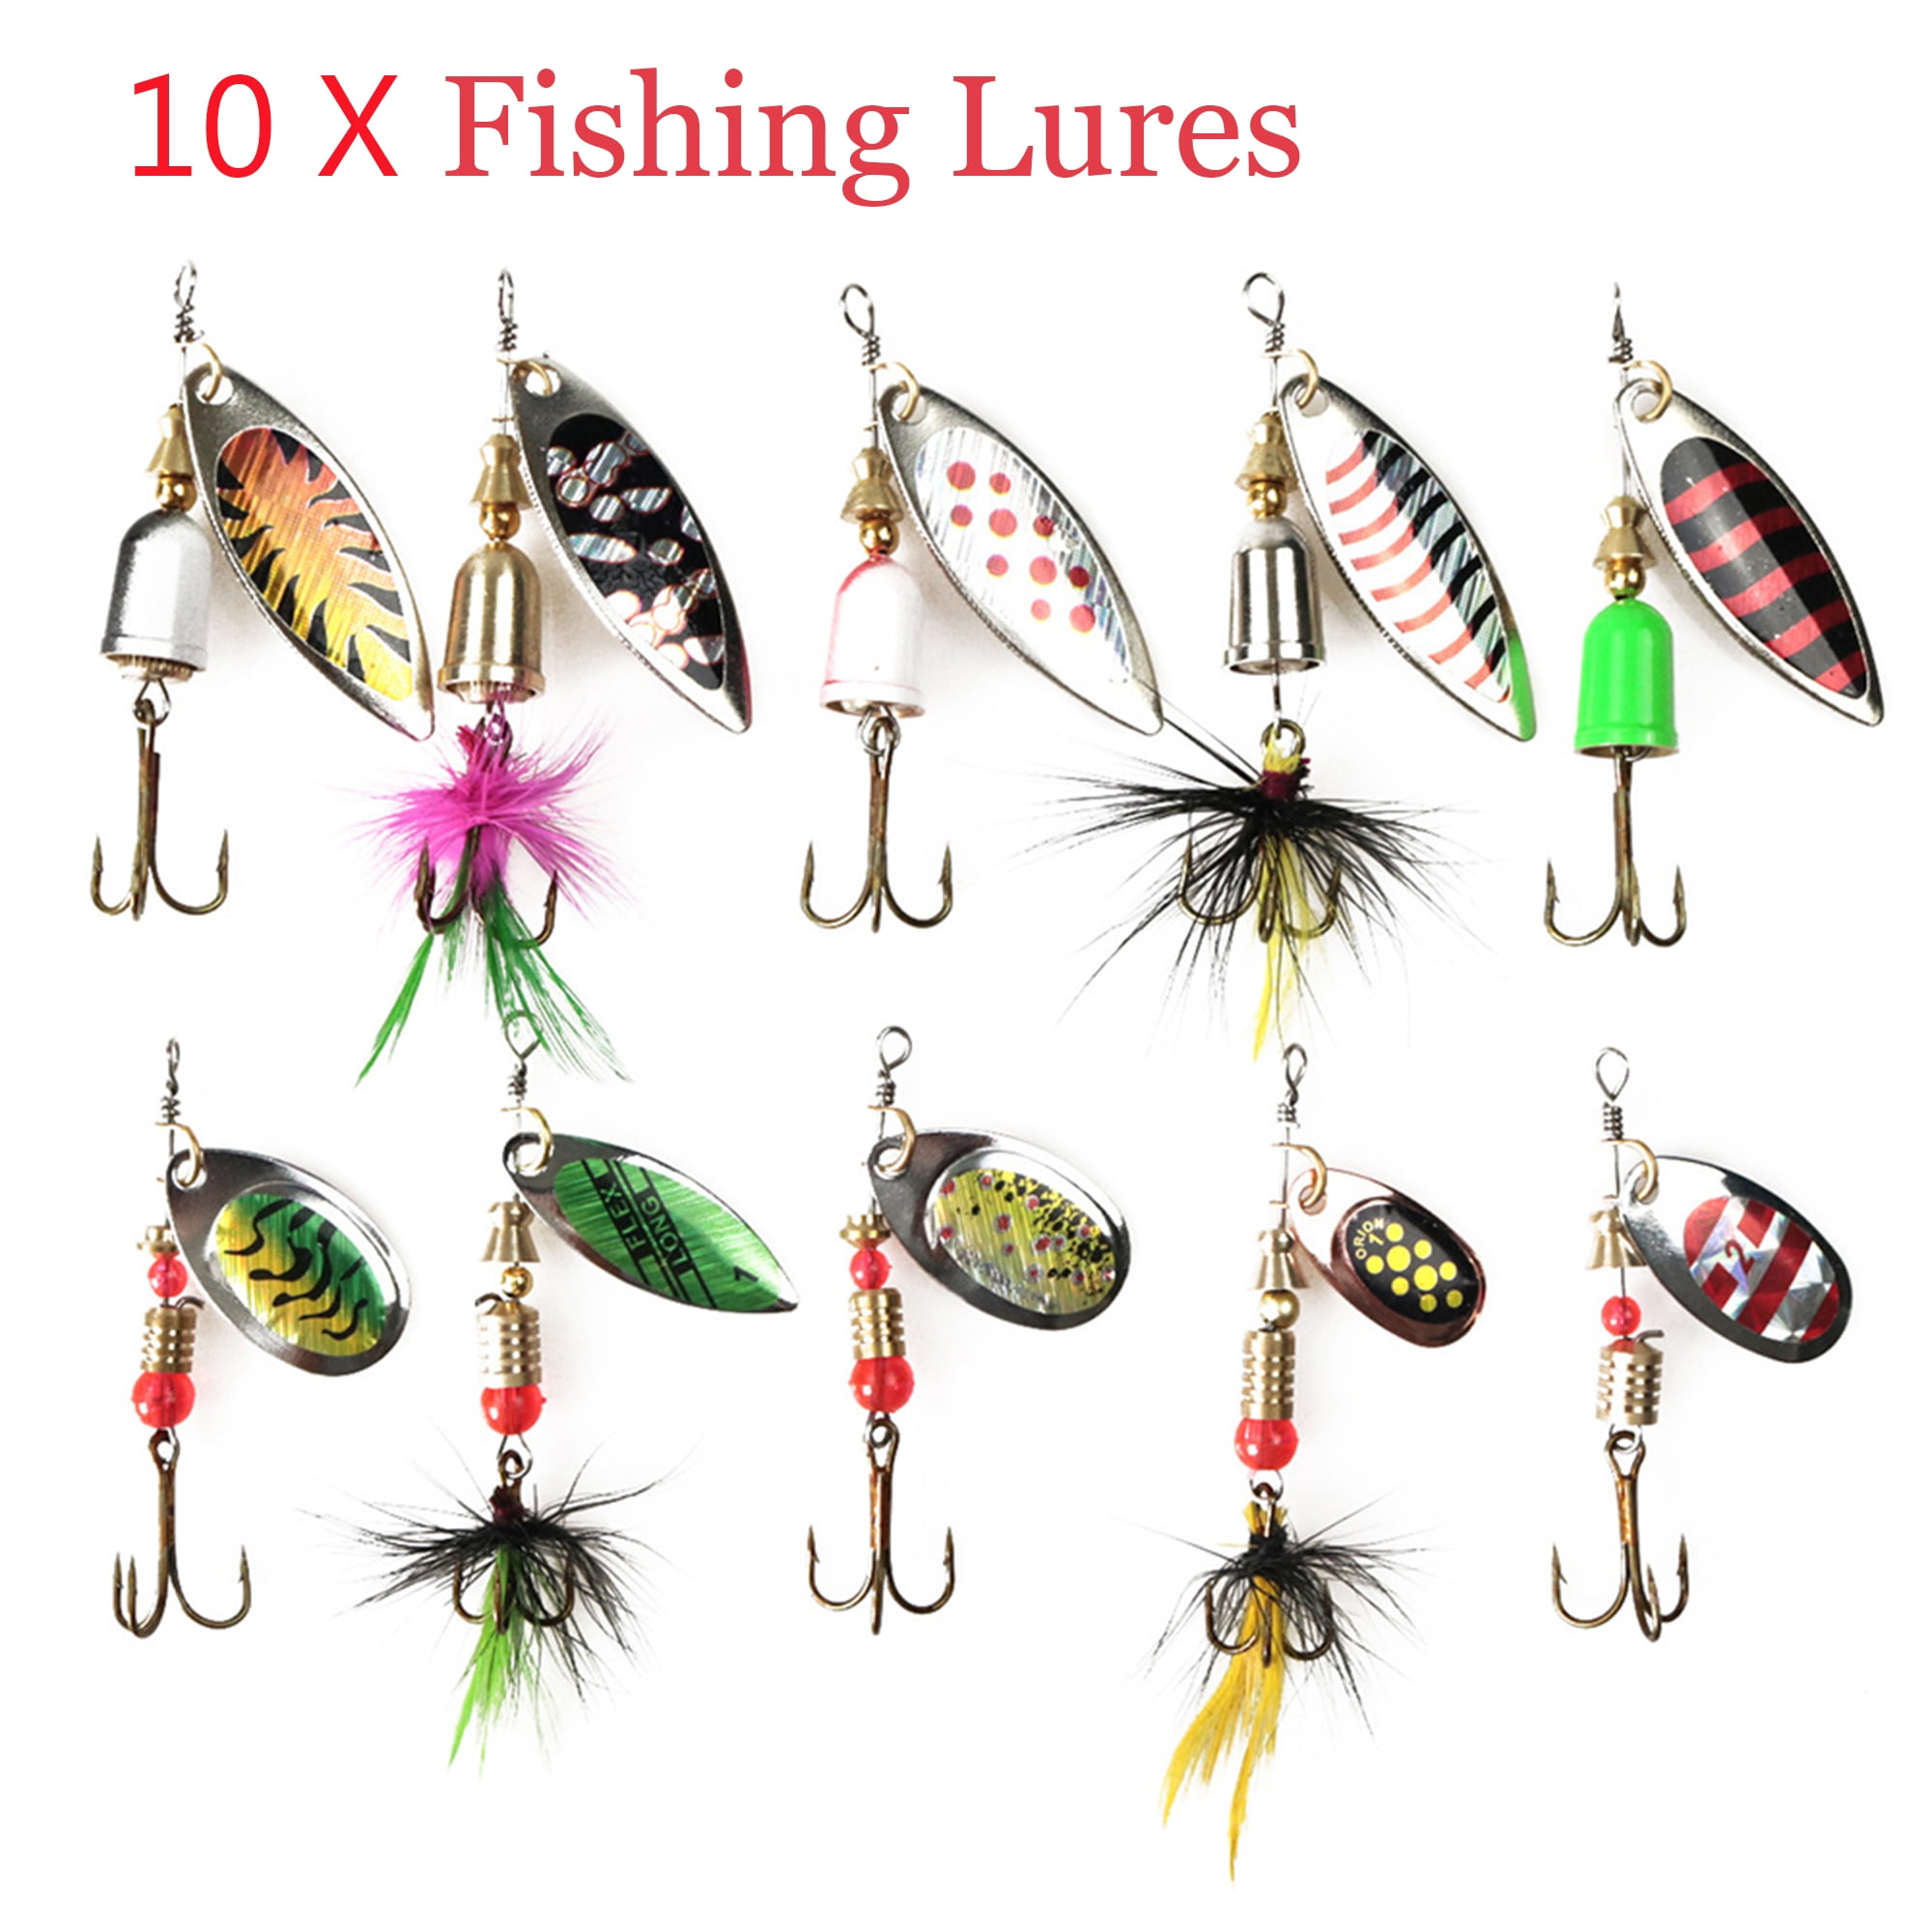 DODOING 10pcs Fishing Lures Spinnerbait for Bass Trout Salmon Walleye Hard Metal  Spinner Baits Kit with 2 Tackle Box 